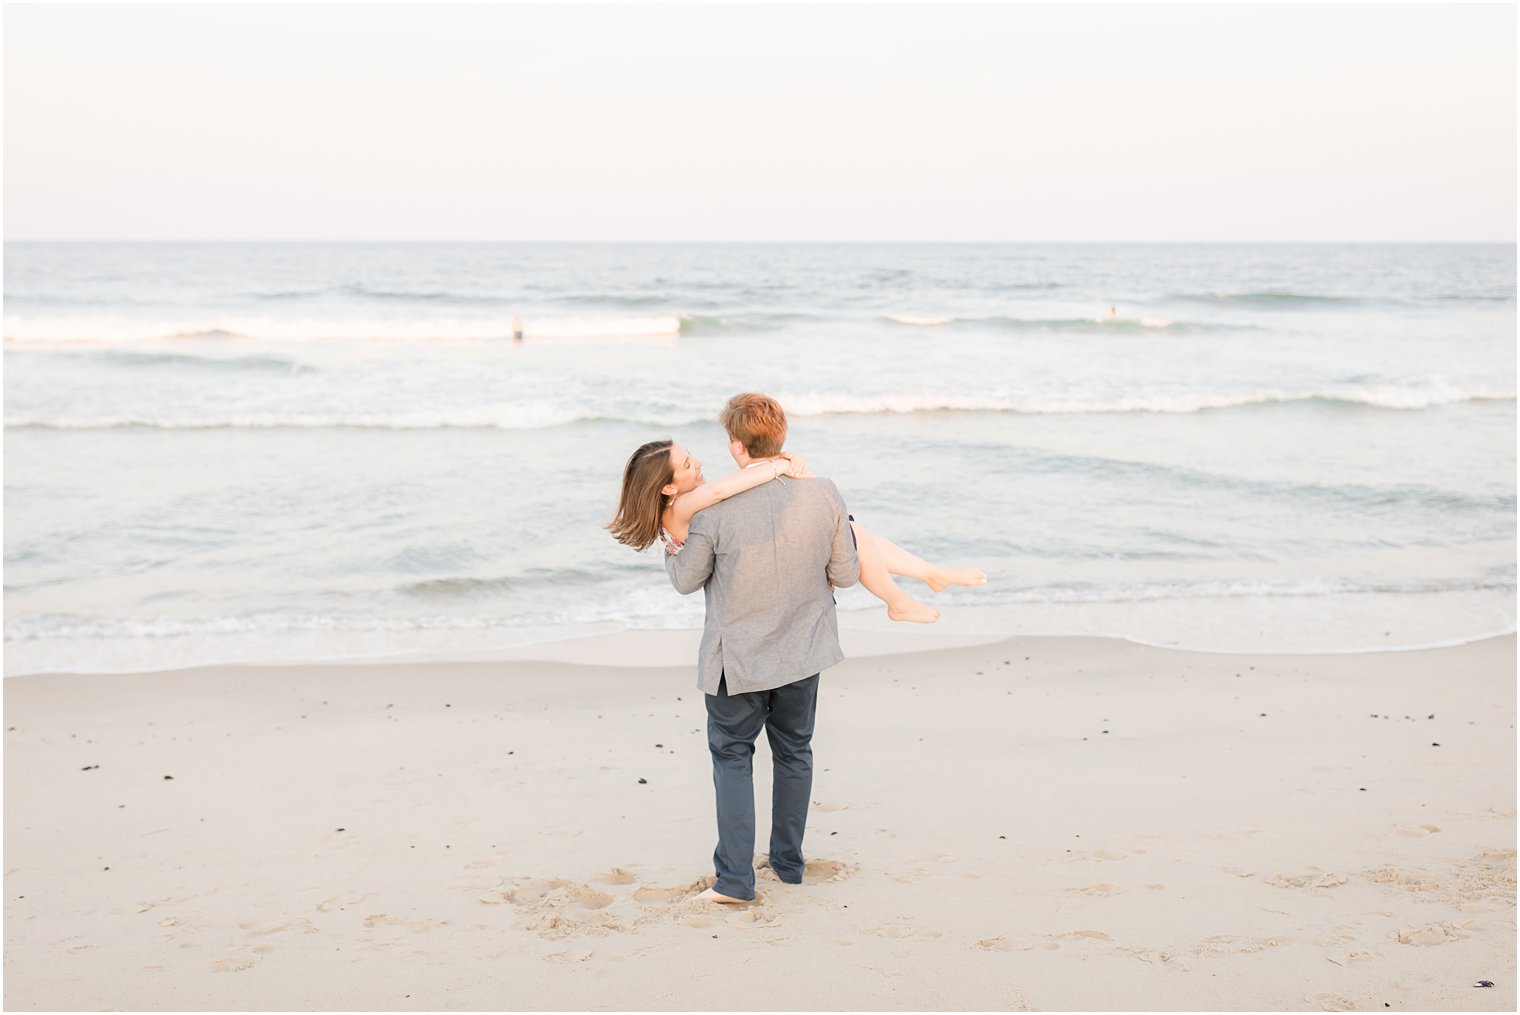 Groom lifting his bride in a romantic beach engagement session 